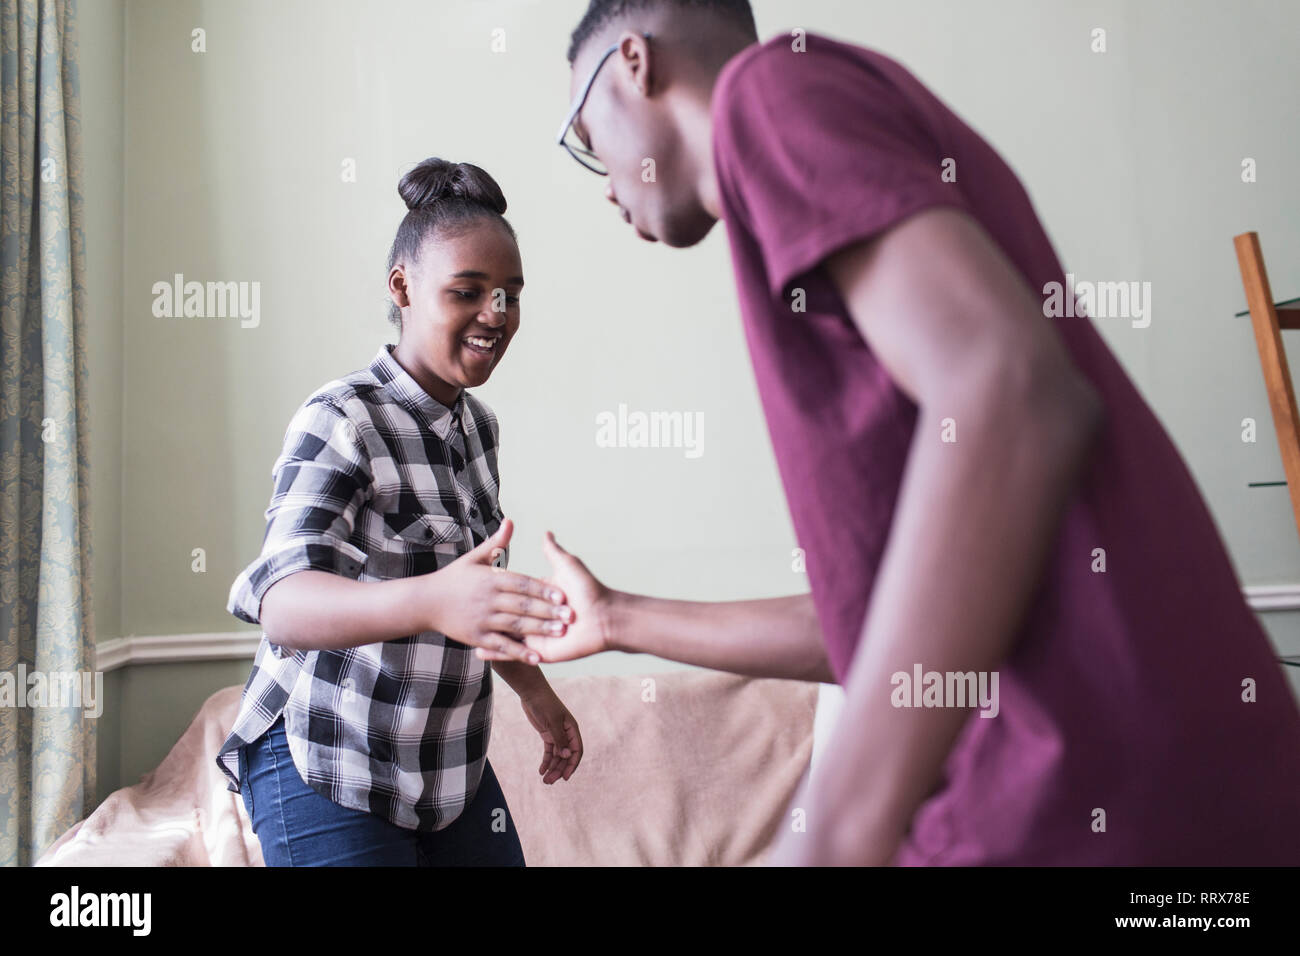 Brother and sister doing secret handshake Stock Photo